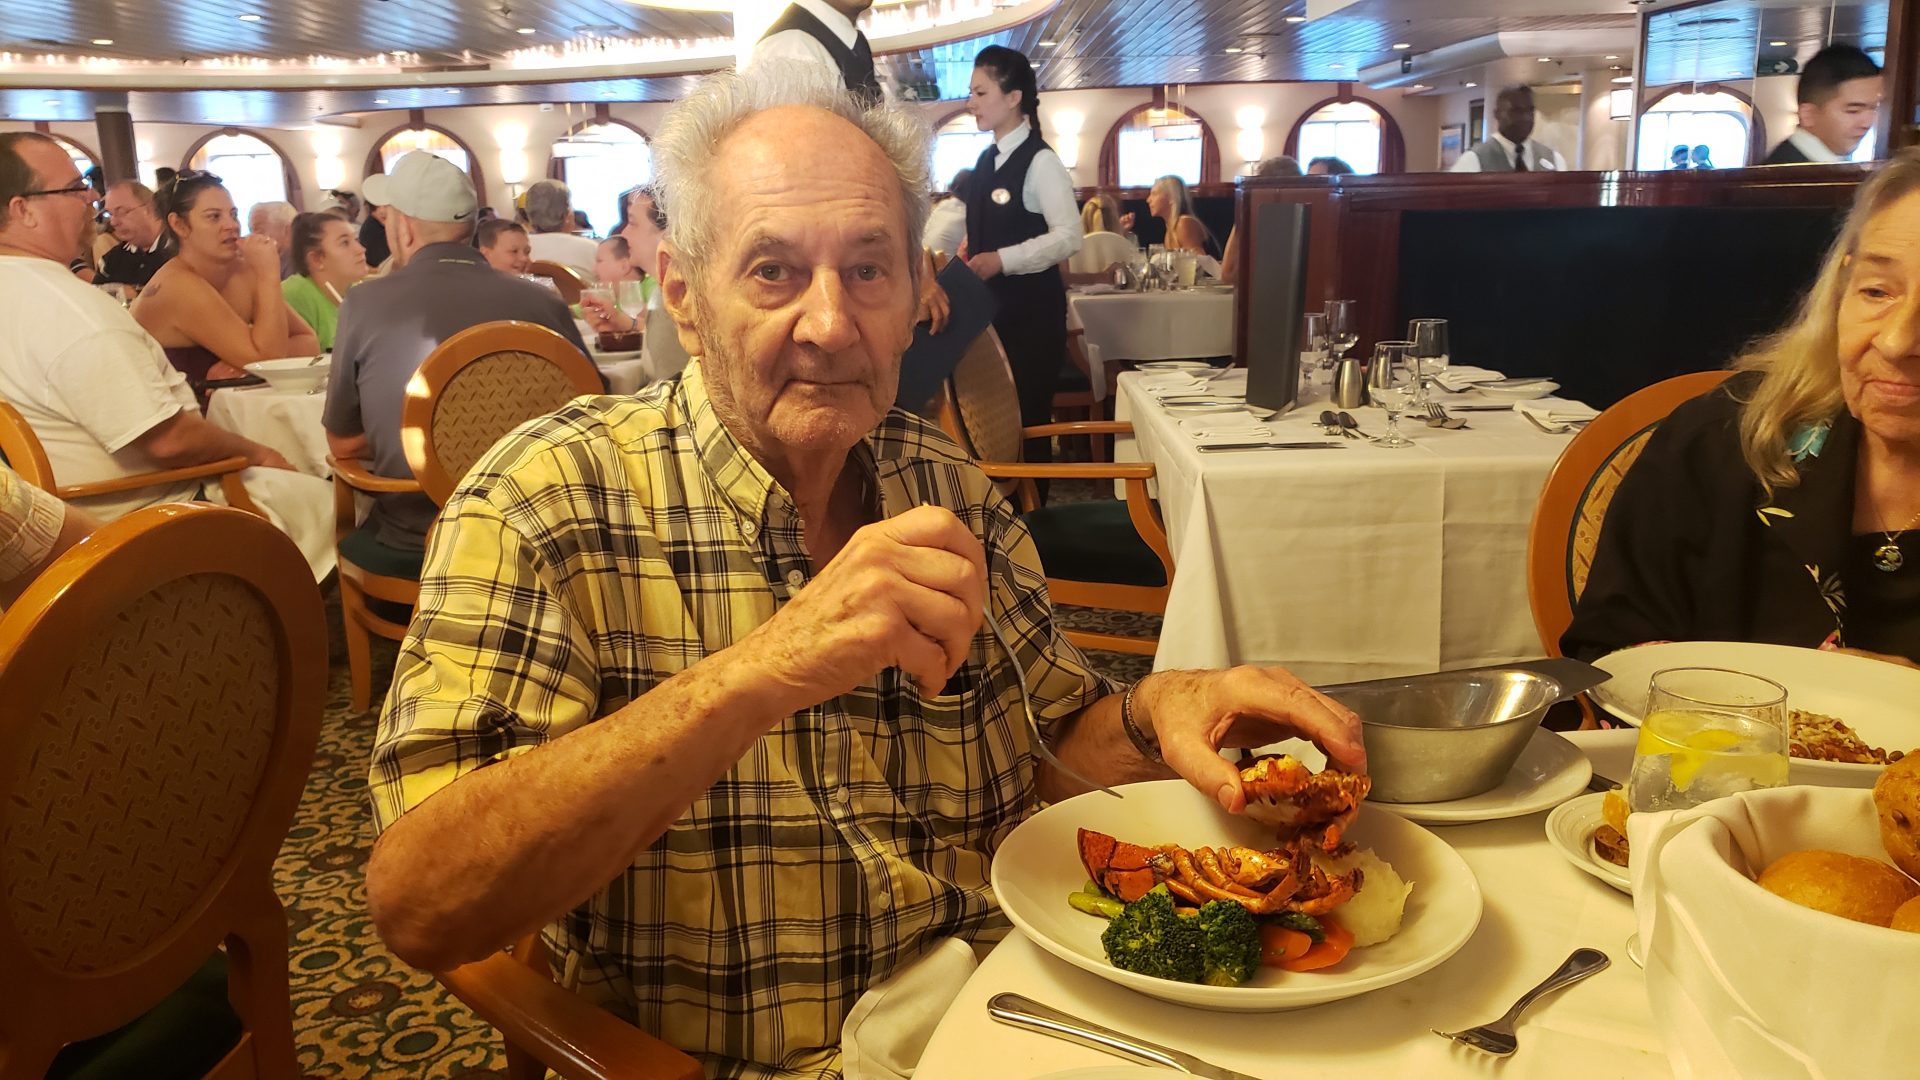 Dad loved his lobster. Our 2019 cruise.